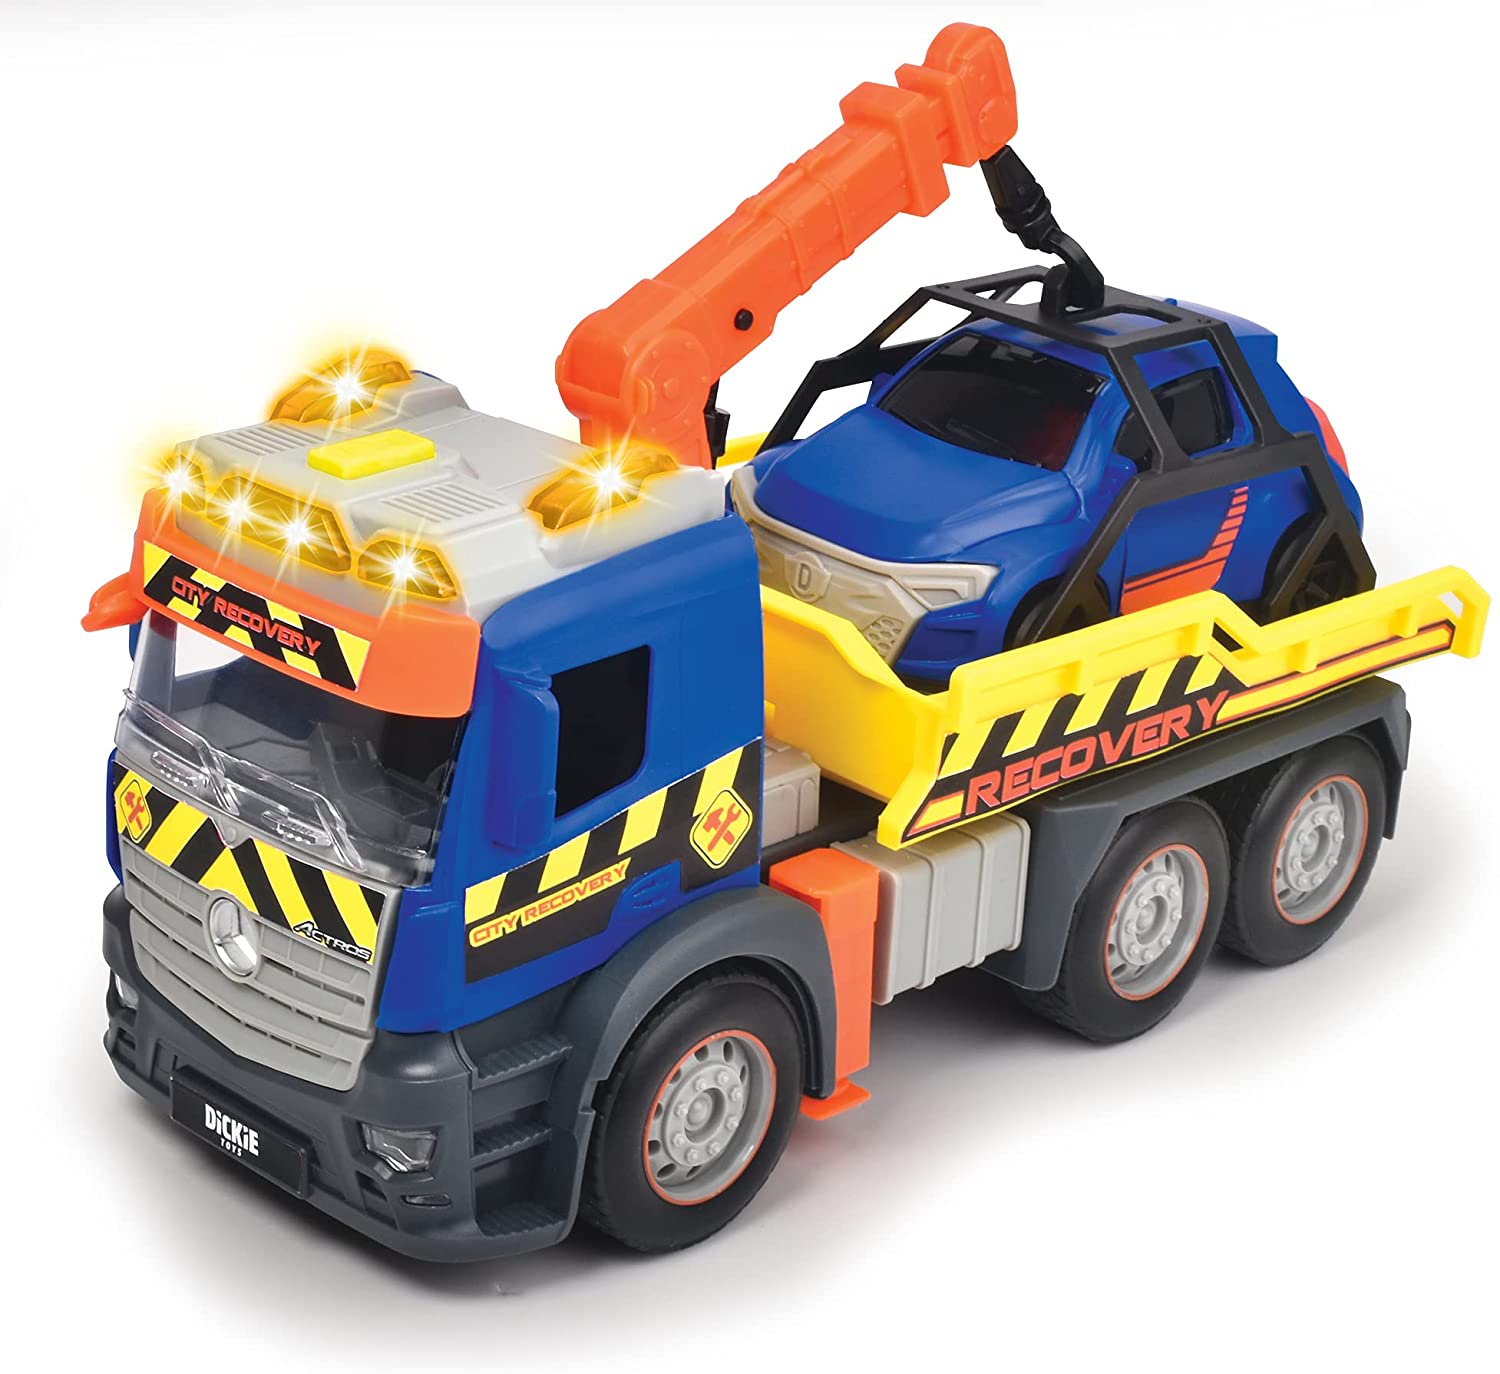 Camion - Recovery - Mercedes, 26 cm | Dickie Toys - 5